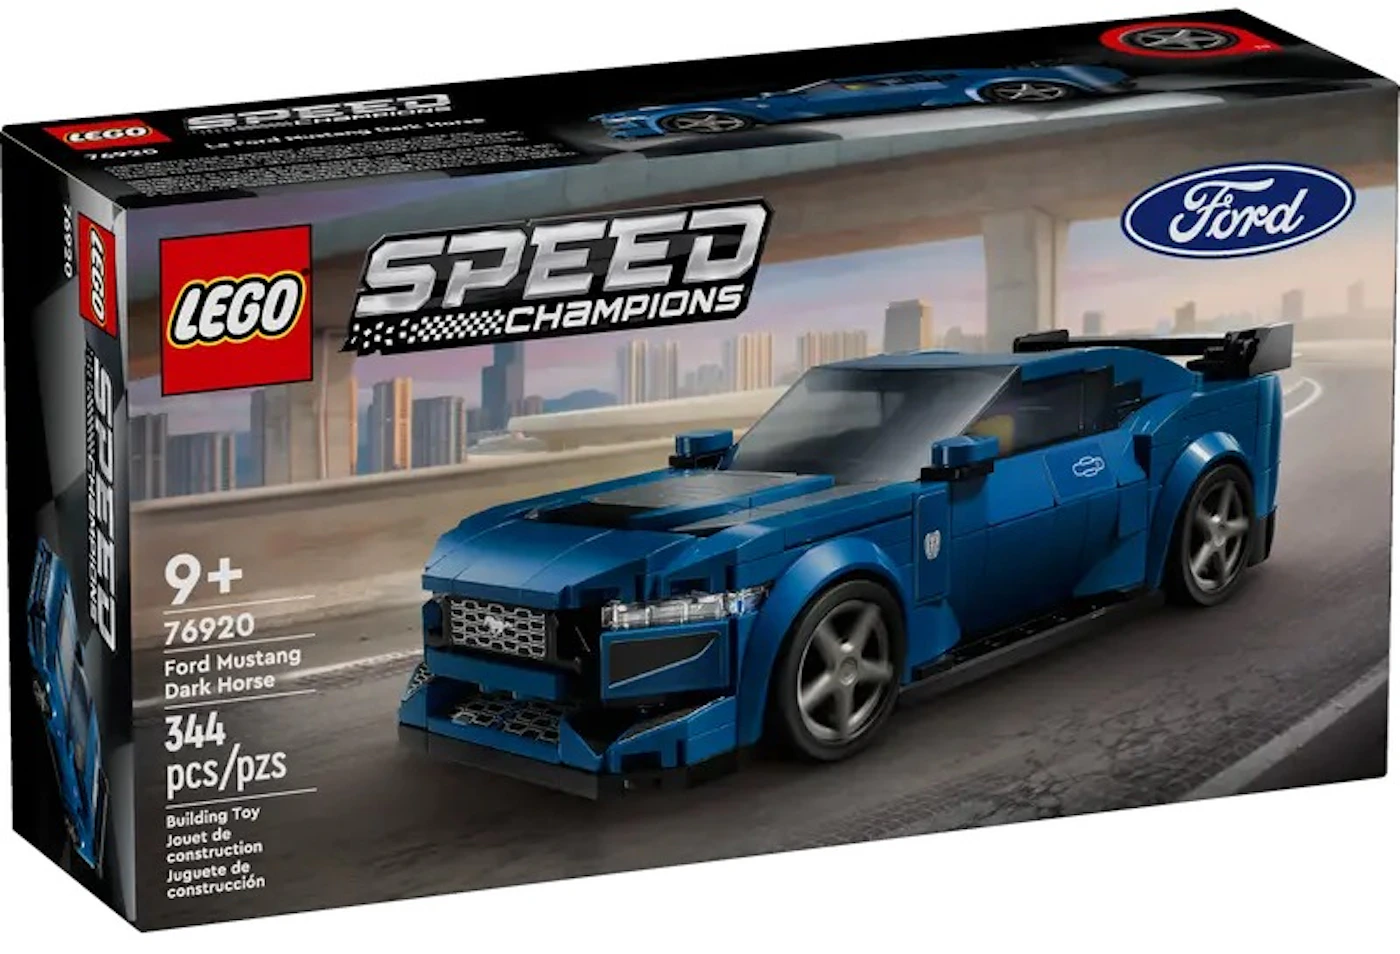 Ford Mustang Dark Horse Sports Car 76920, Speed Champions